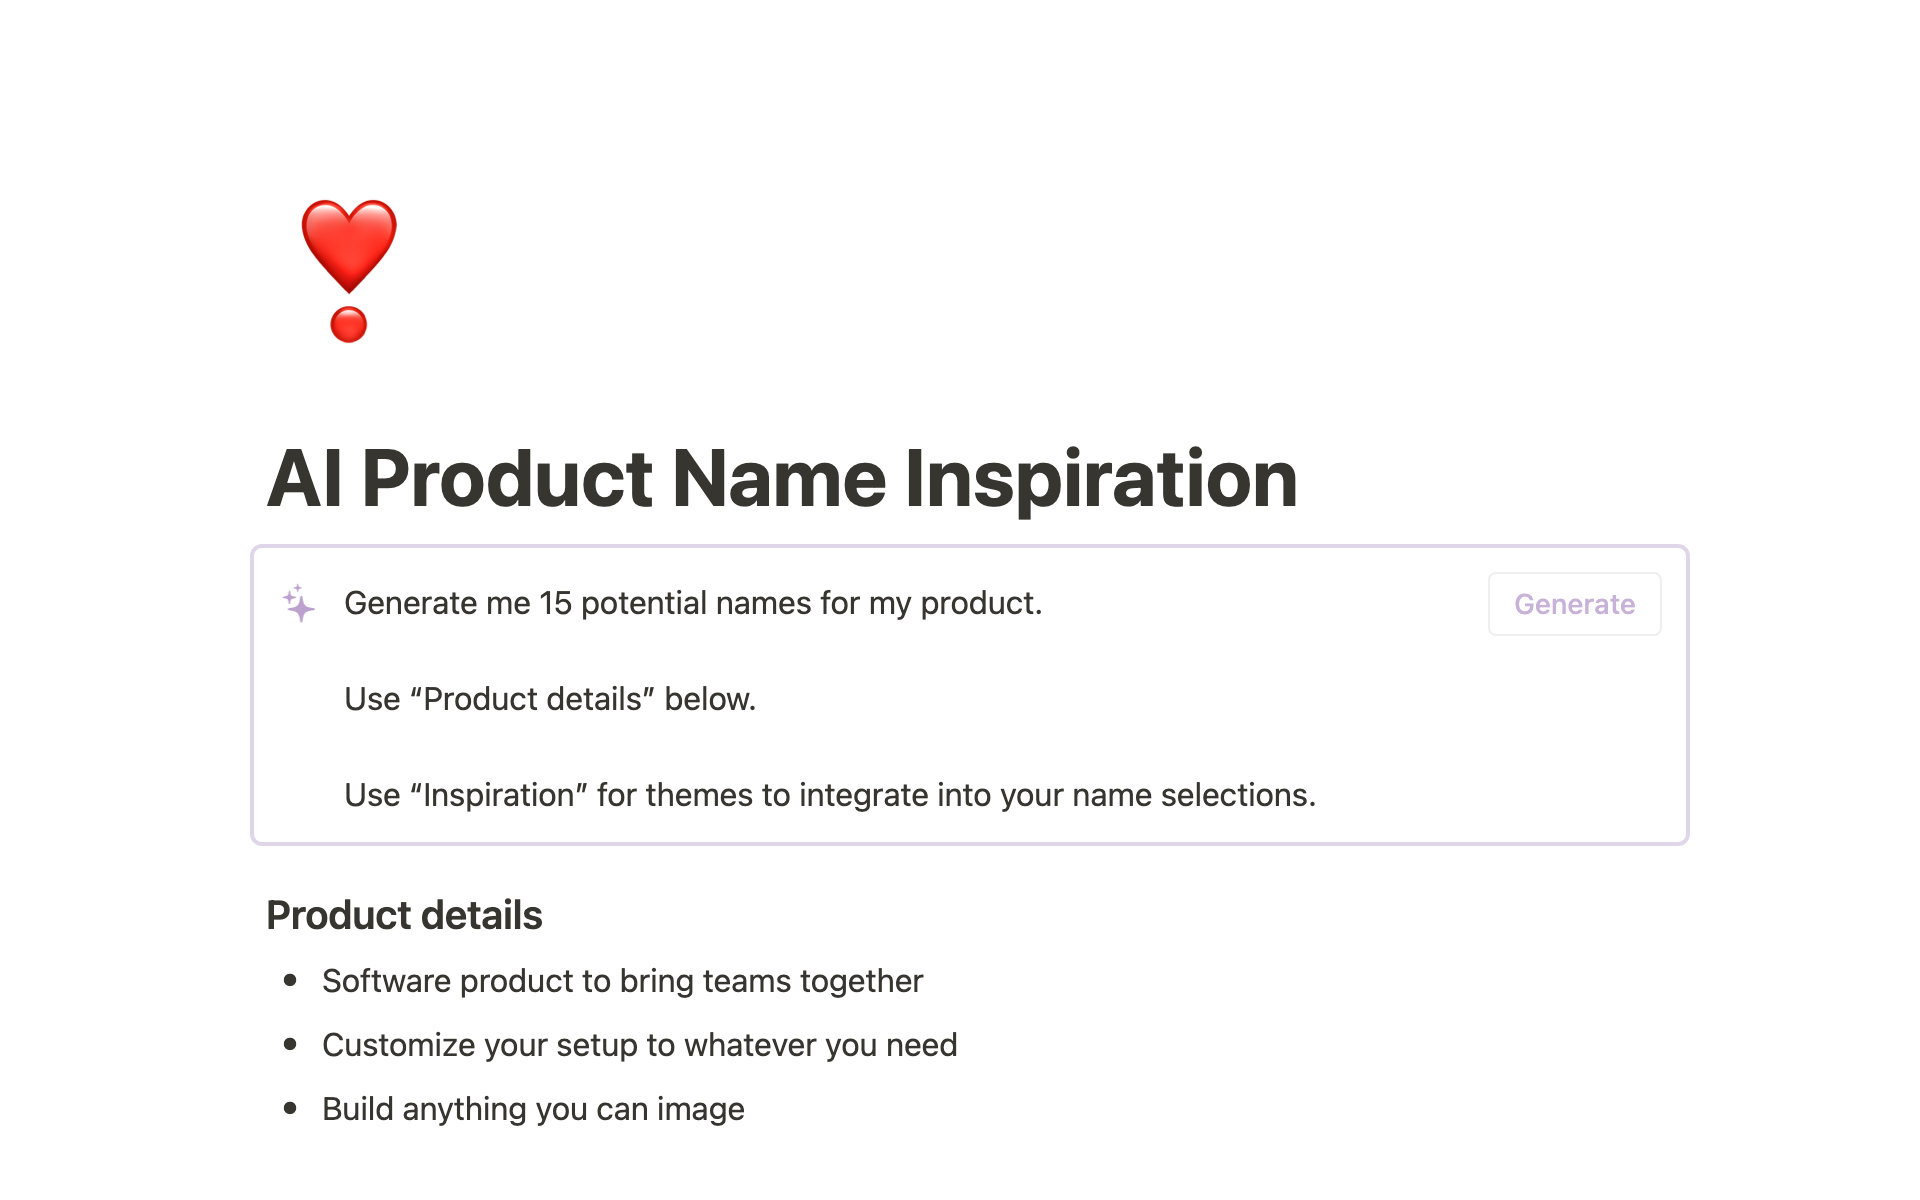 A screenshot of a product name inspiration promt using Notion AI.